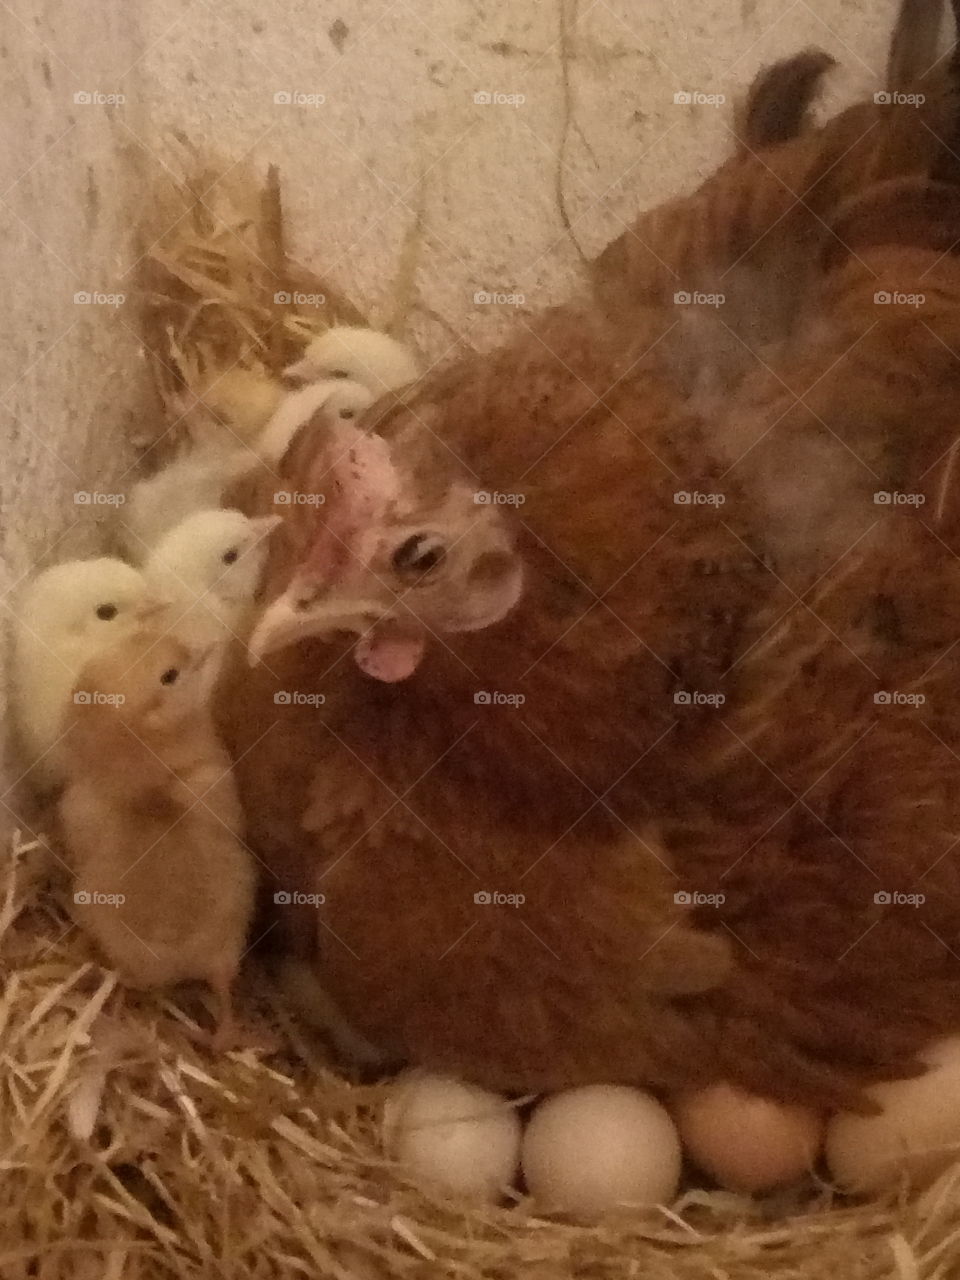 The first look of the chicks of life